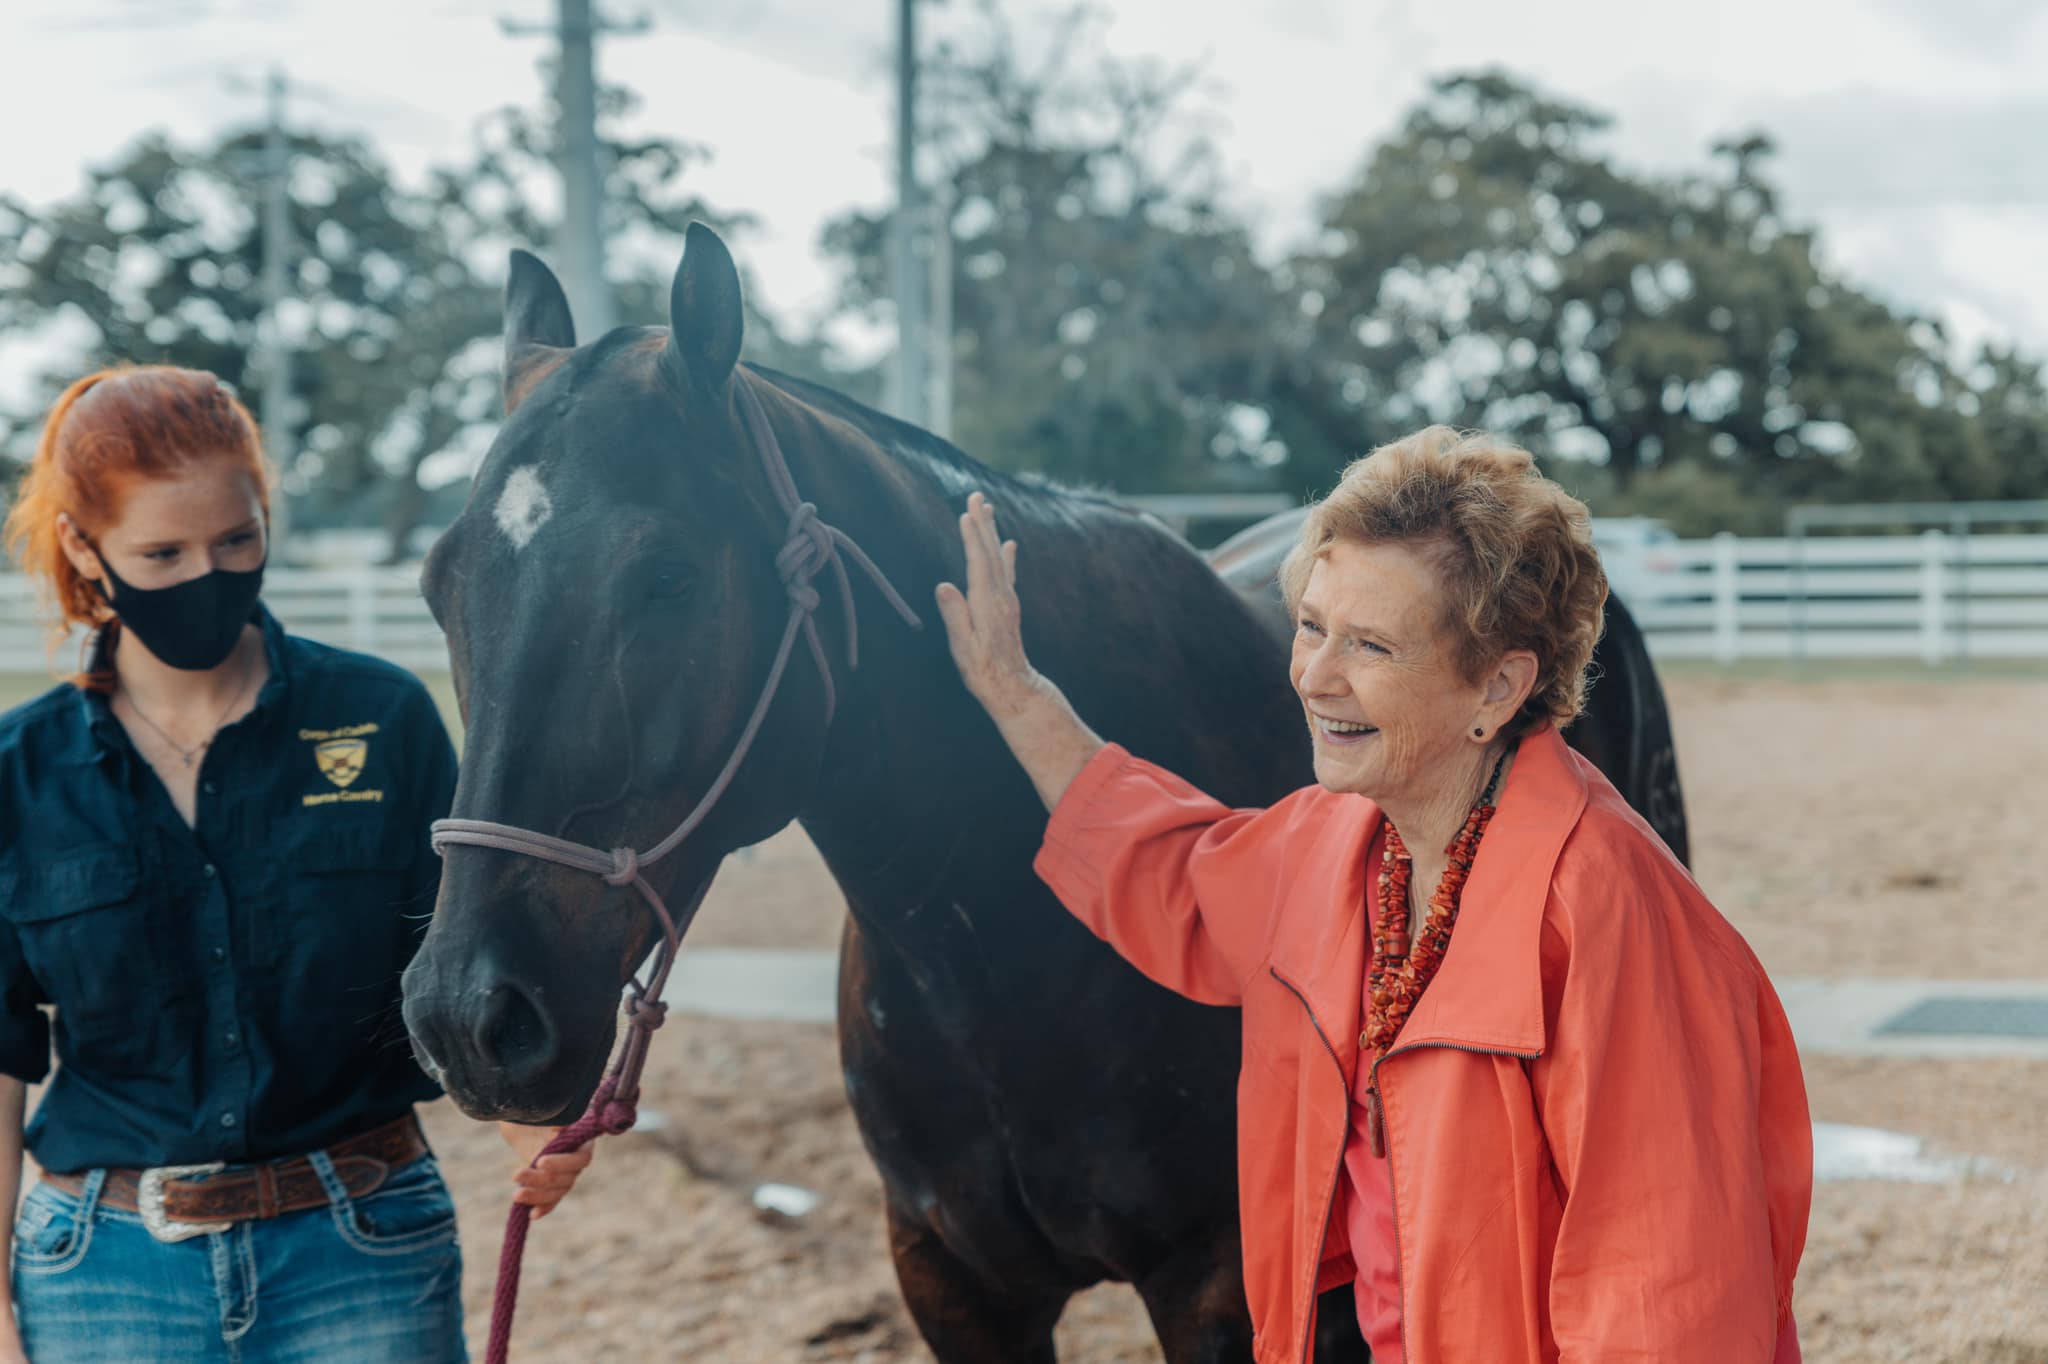 Image of Dorothy McFerrin and Corps of Cadets staff member with sponsored horse Artie